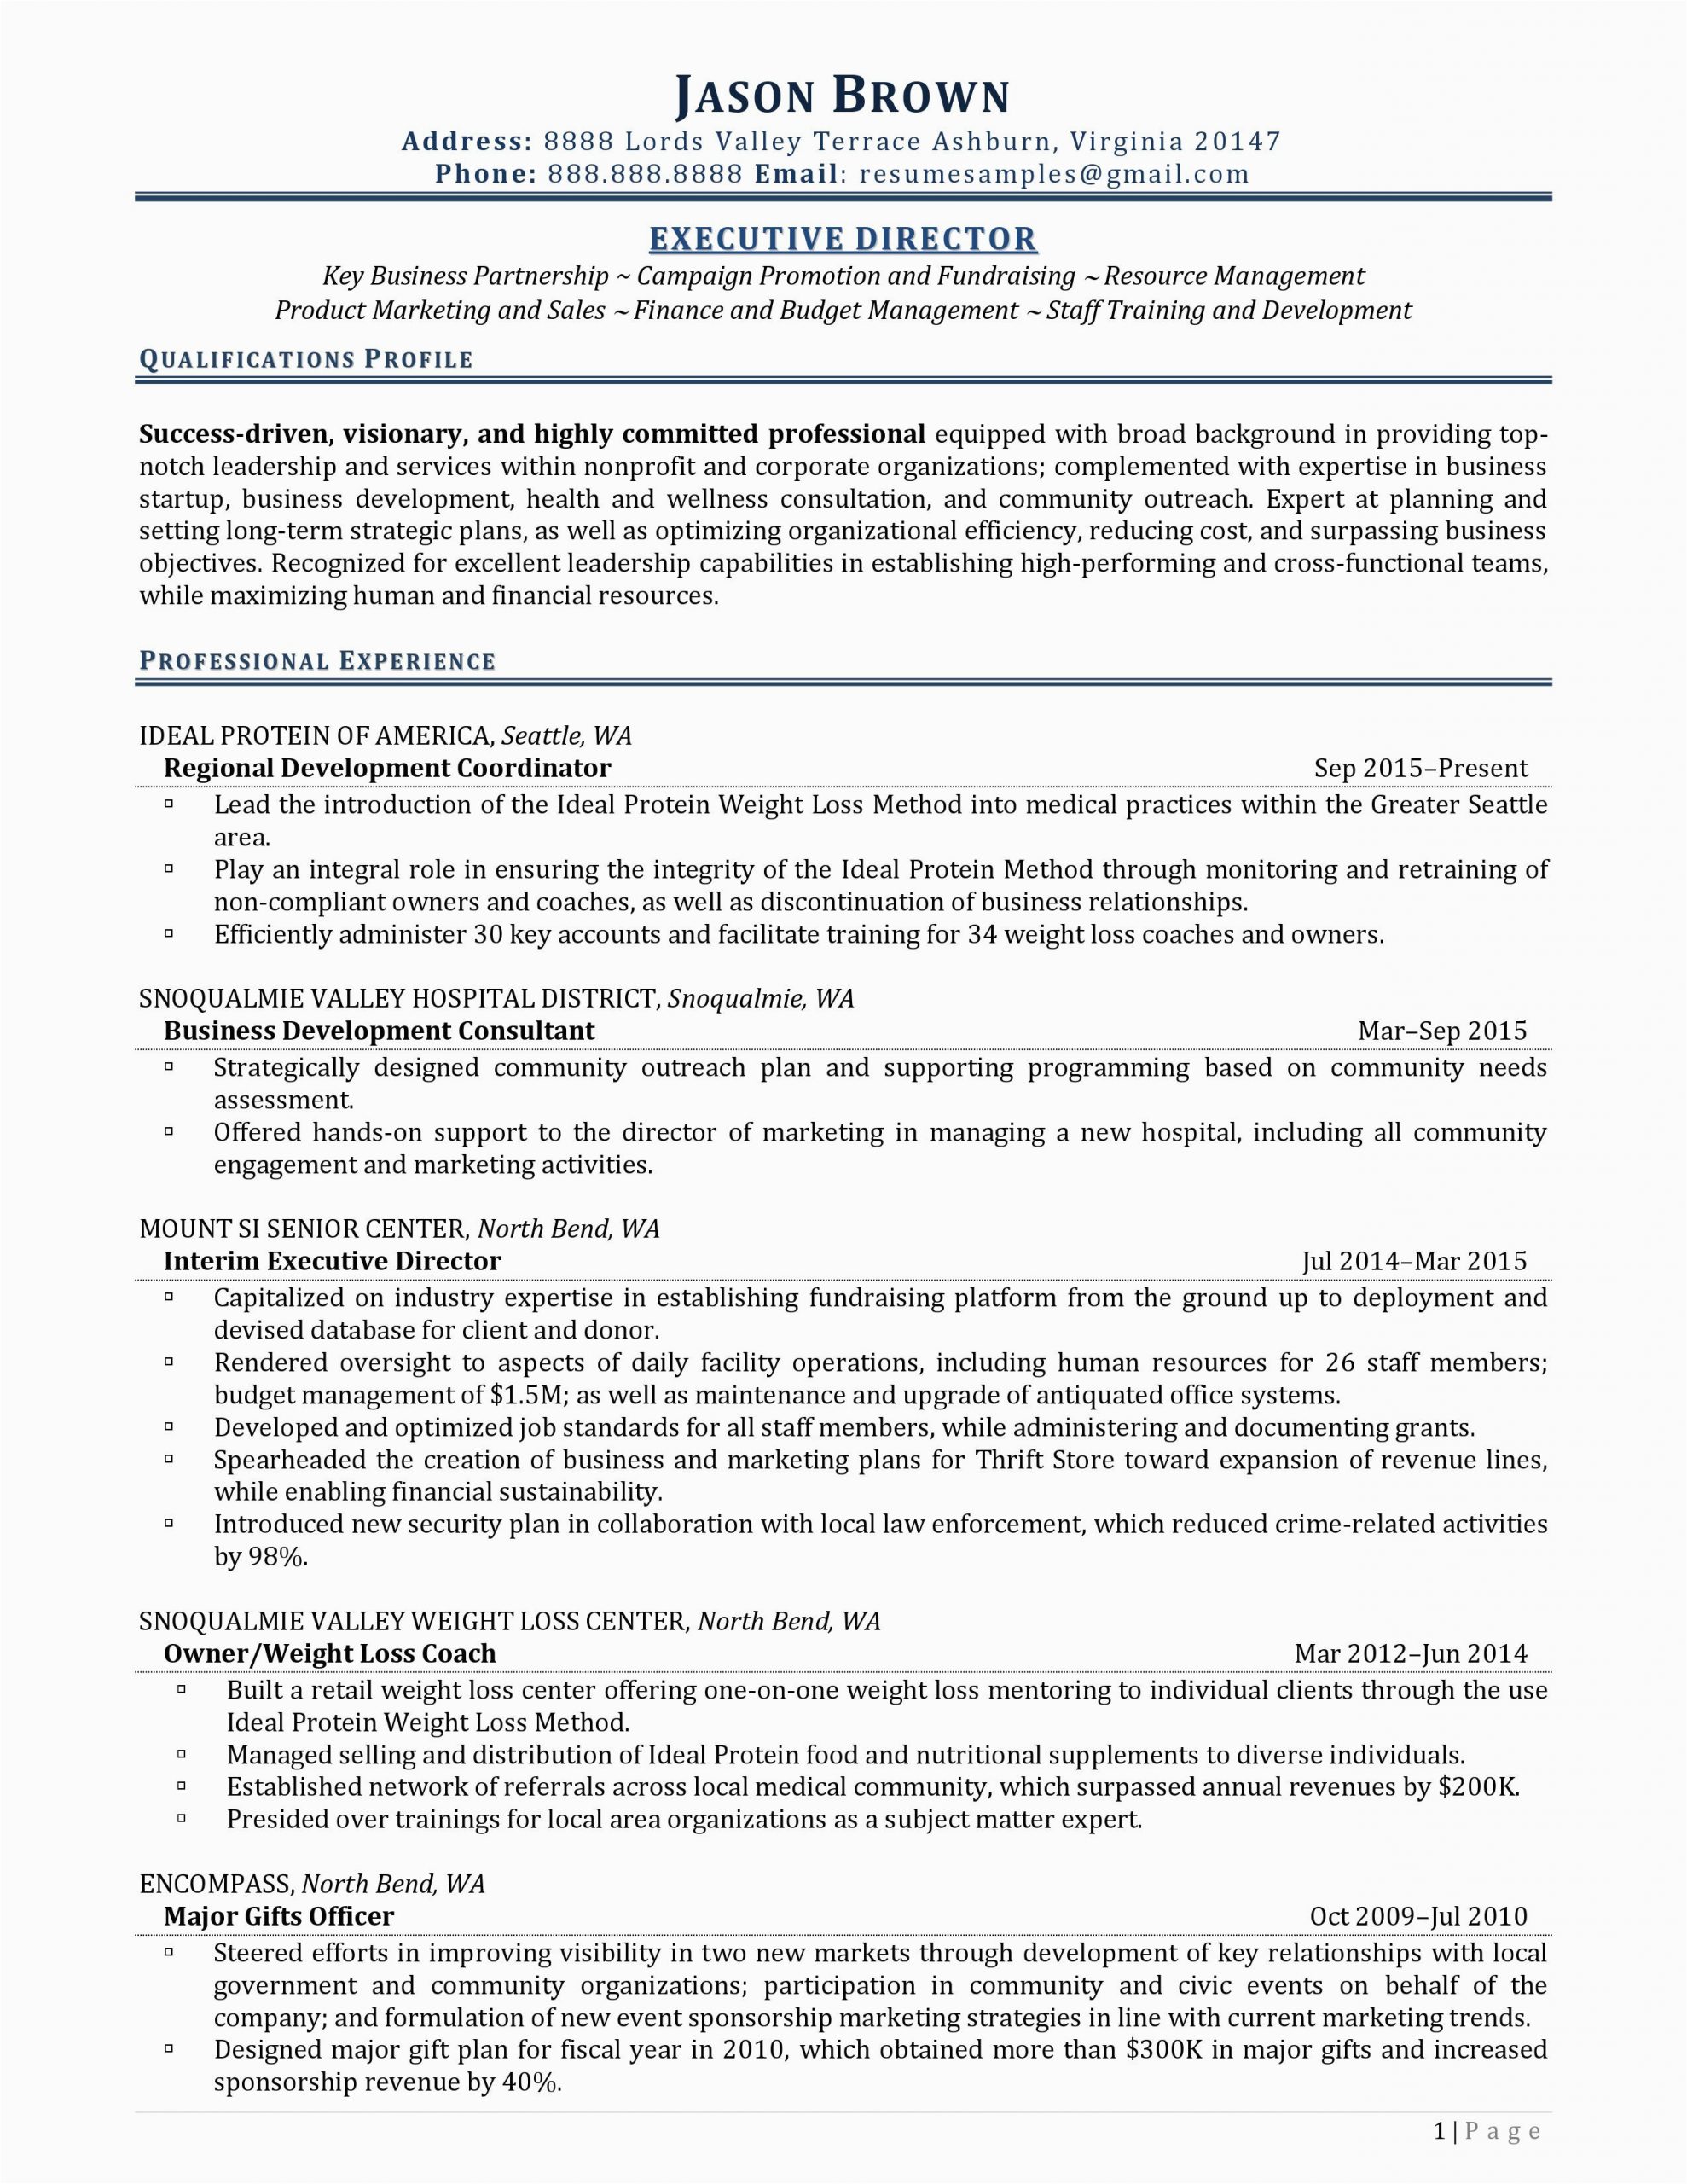 Sample Resume for Nonprofit Executive Director Executive Director Resume Examples